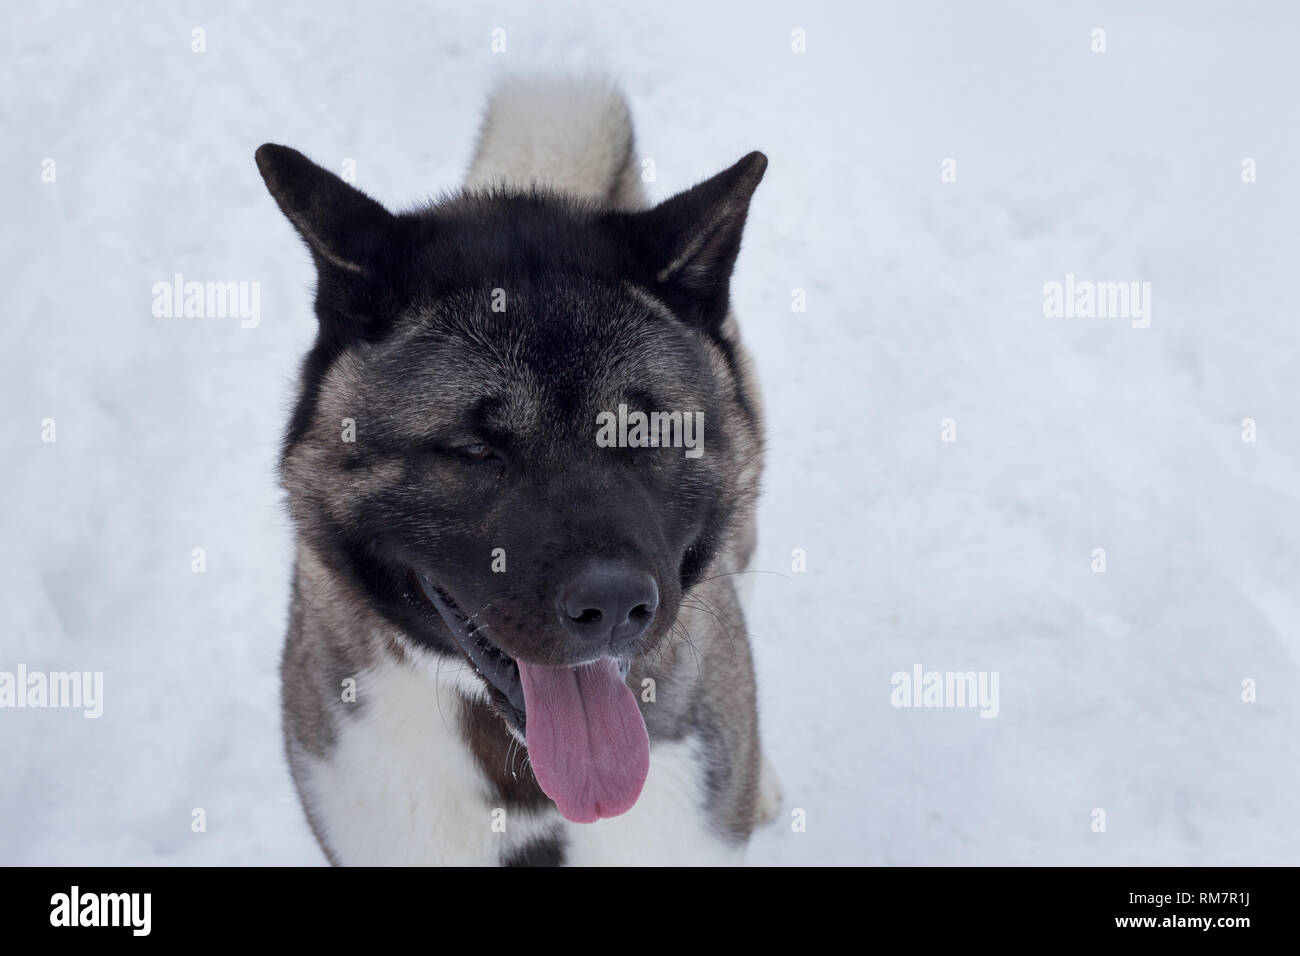 Cute american akita with lolling tongue is standing on a white snow. Great japanese dog. Pet animals. Purebred dog. Stock Photo